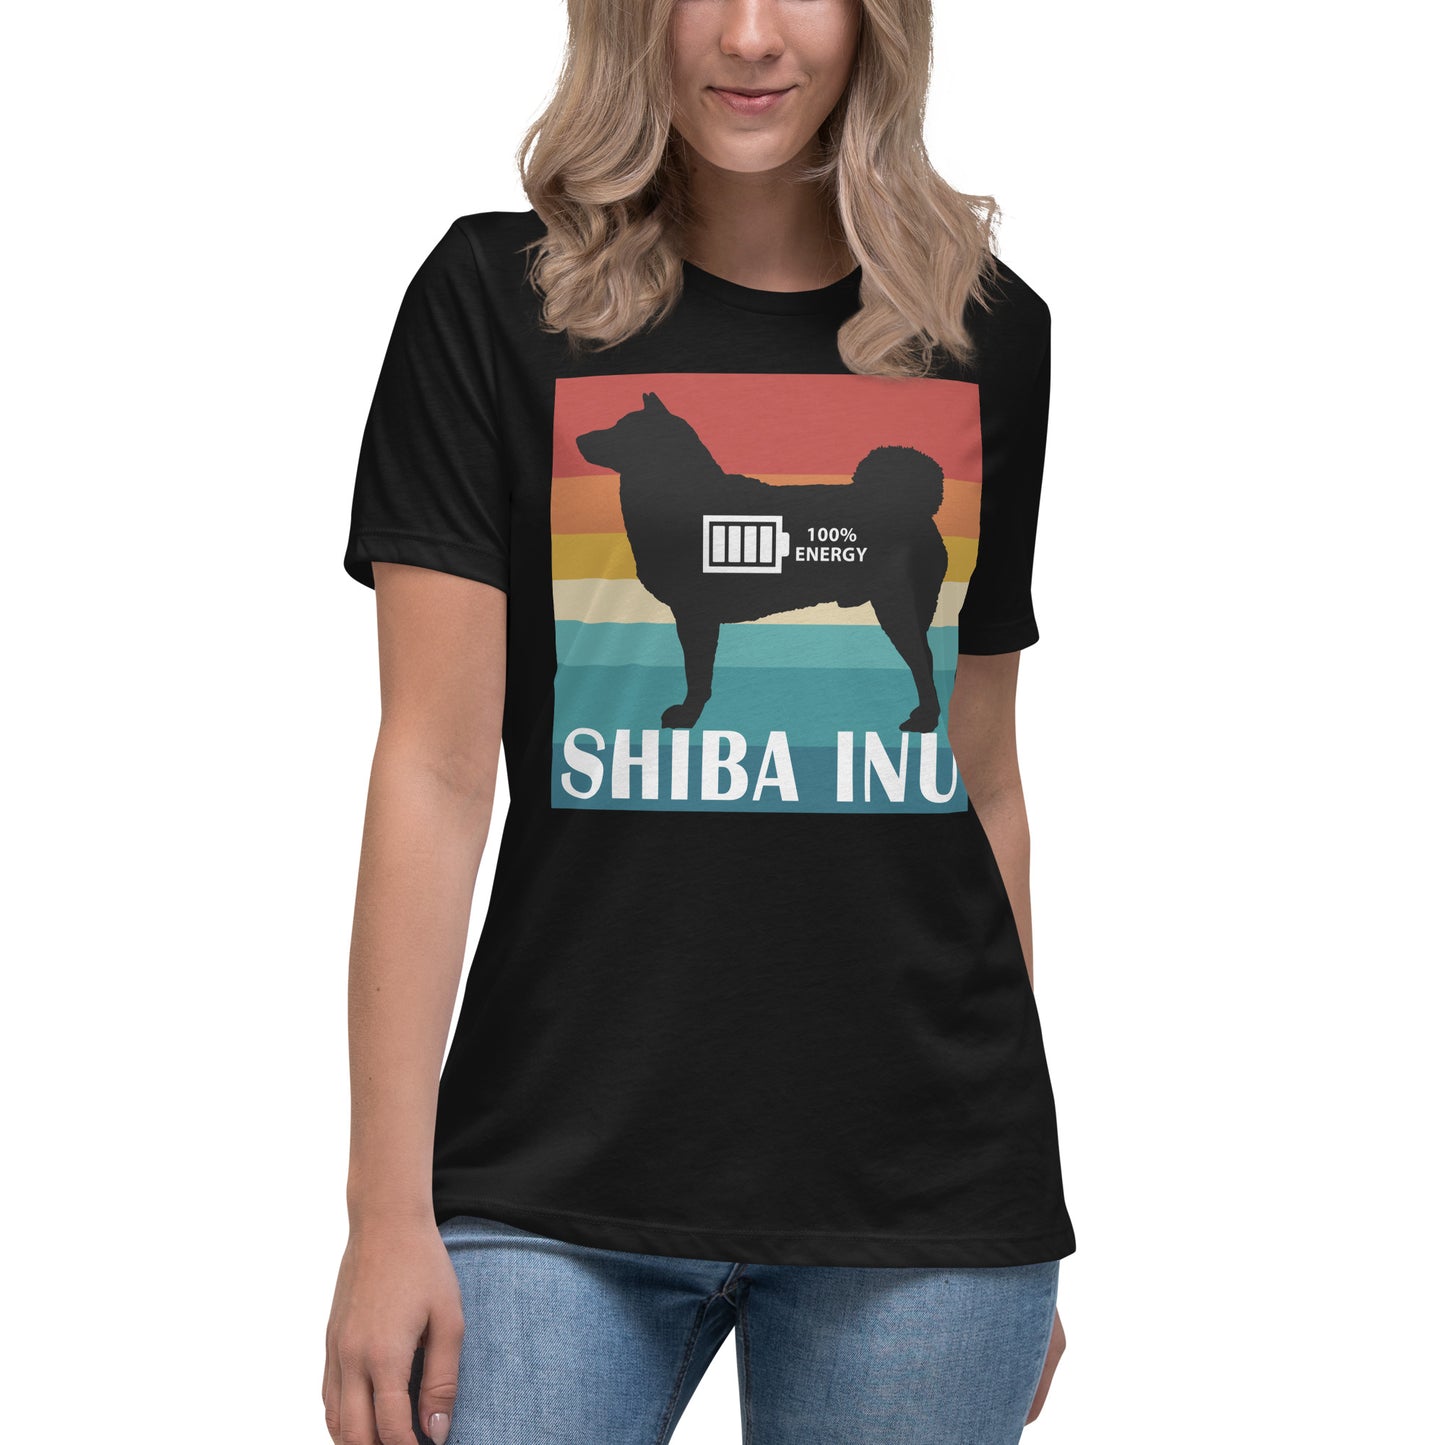 Shiba Inu 100% Energy Women's Relaxed T-Shirt by Dog Artistry